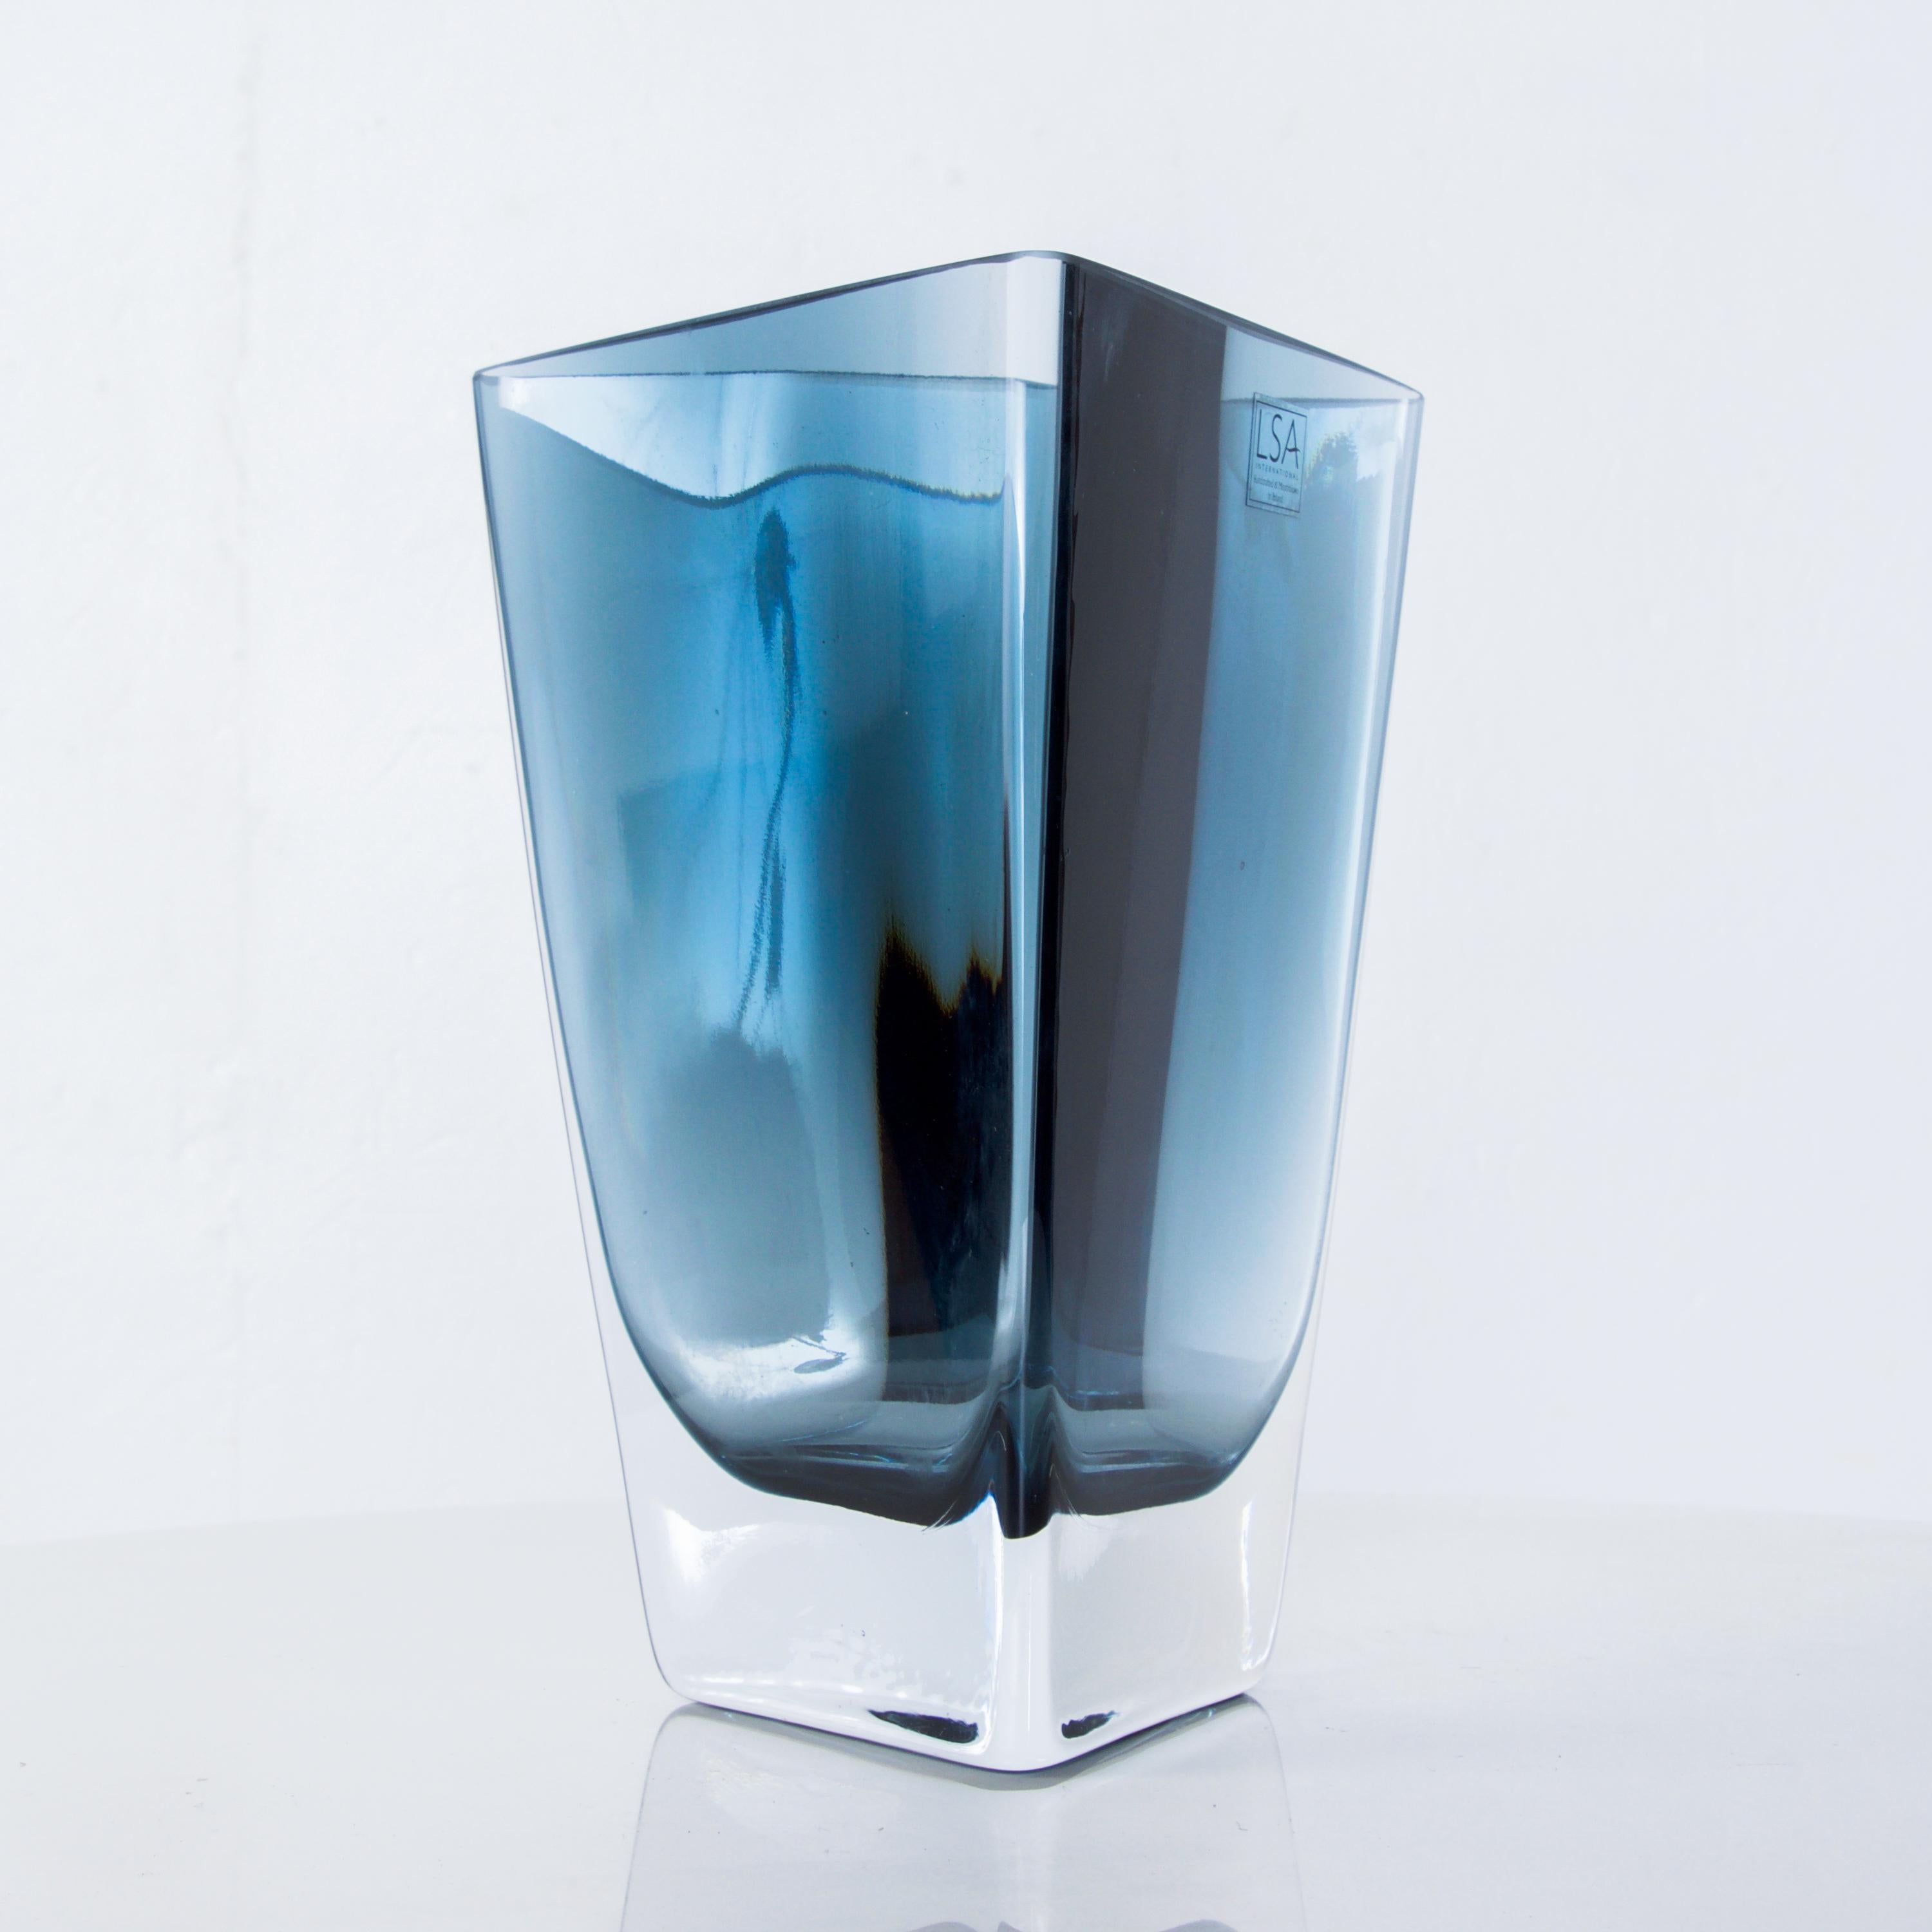 For your consideration, a triangular handblown decorative glass vase.
Made in Poland. Retains original label from the maker. 
Dominant color is blue and transparent. 
Dimensions: 8 1/2